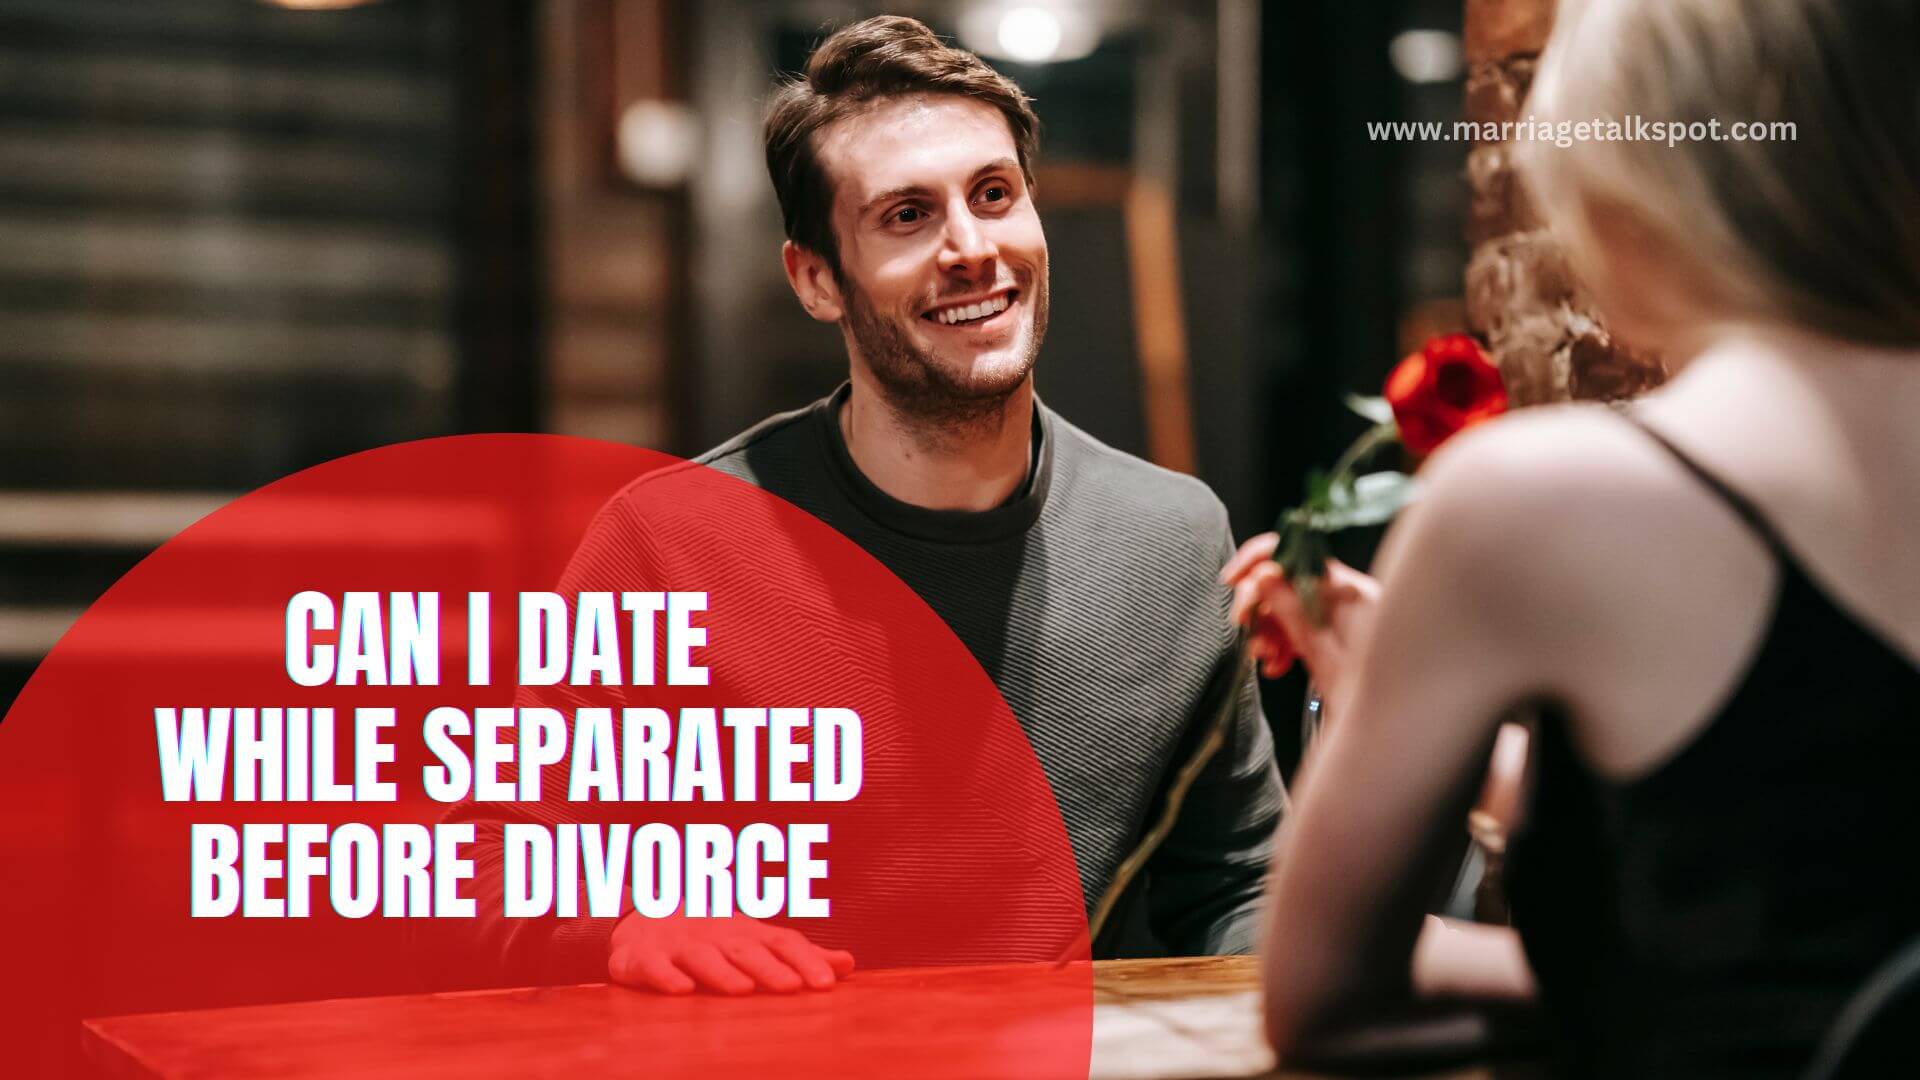 CAN I DATE WHILE SEPARATED BEFORE DIVORCE